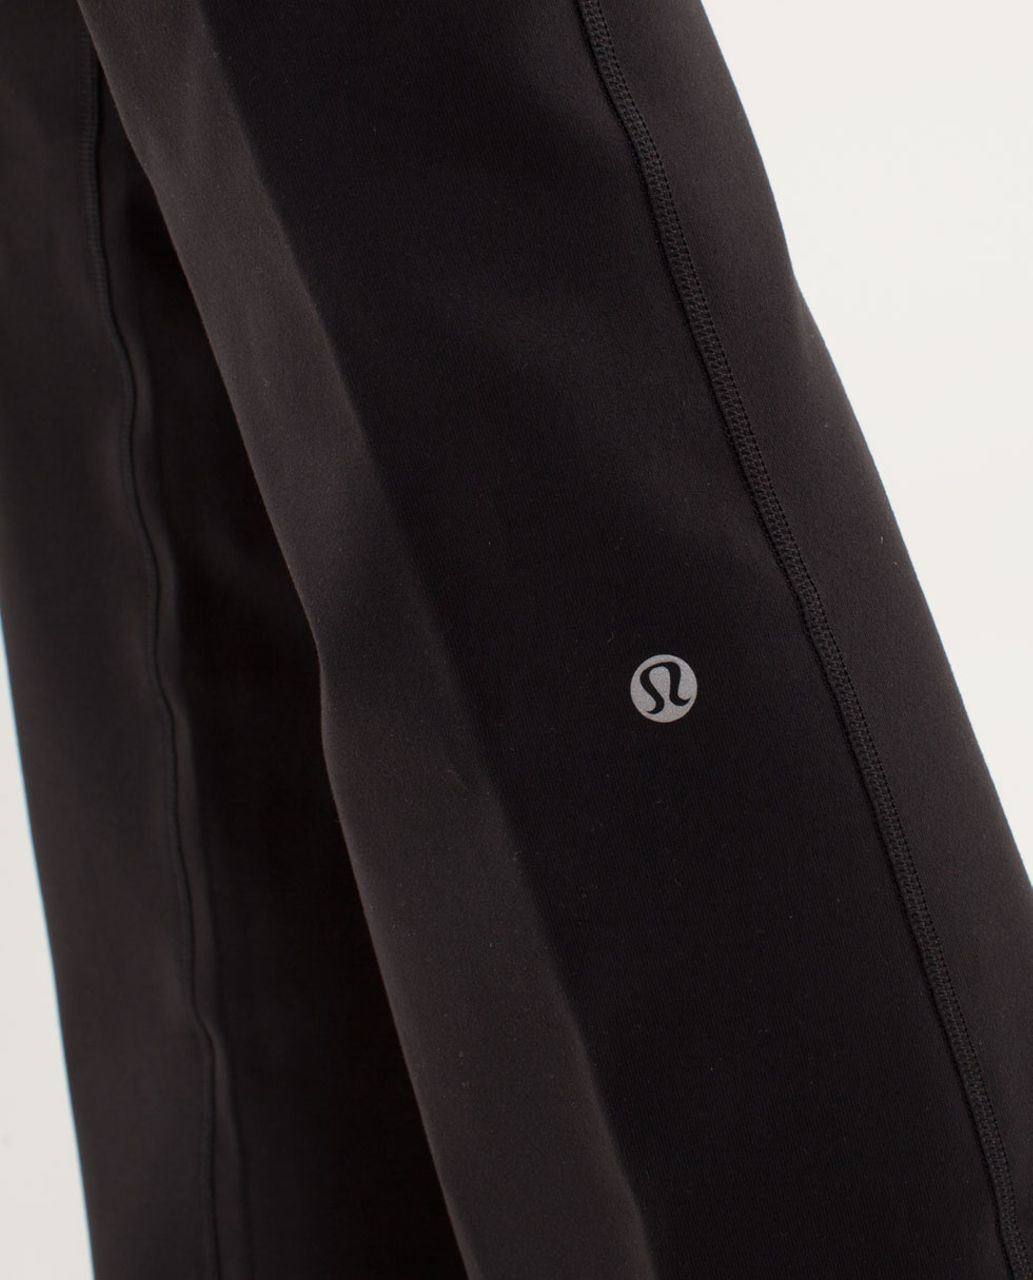 Lululemon Groove Pant (Tall) - Black / Transition Fall 12 Quilt 1